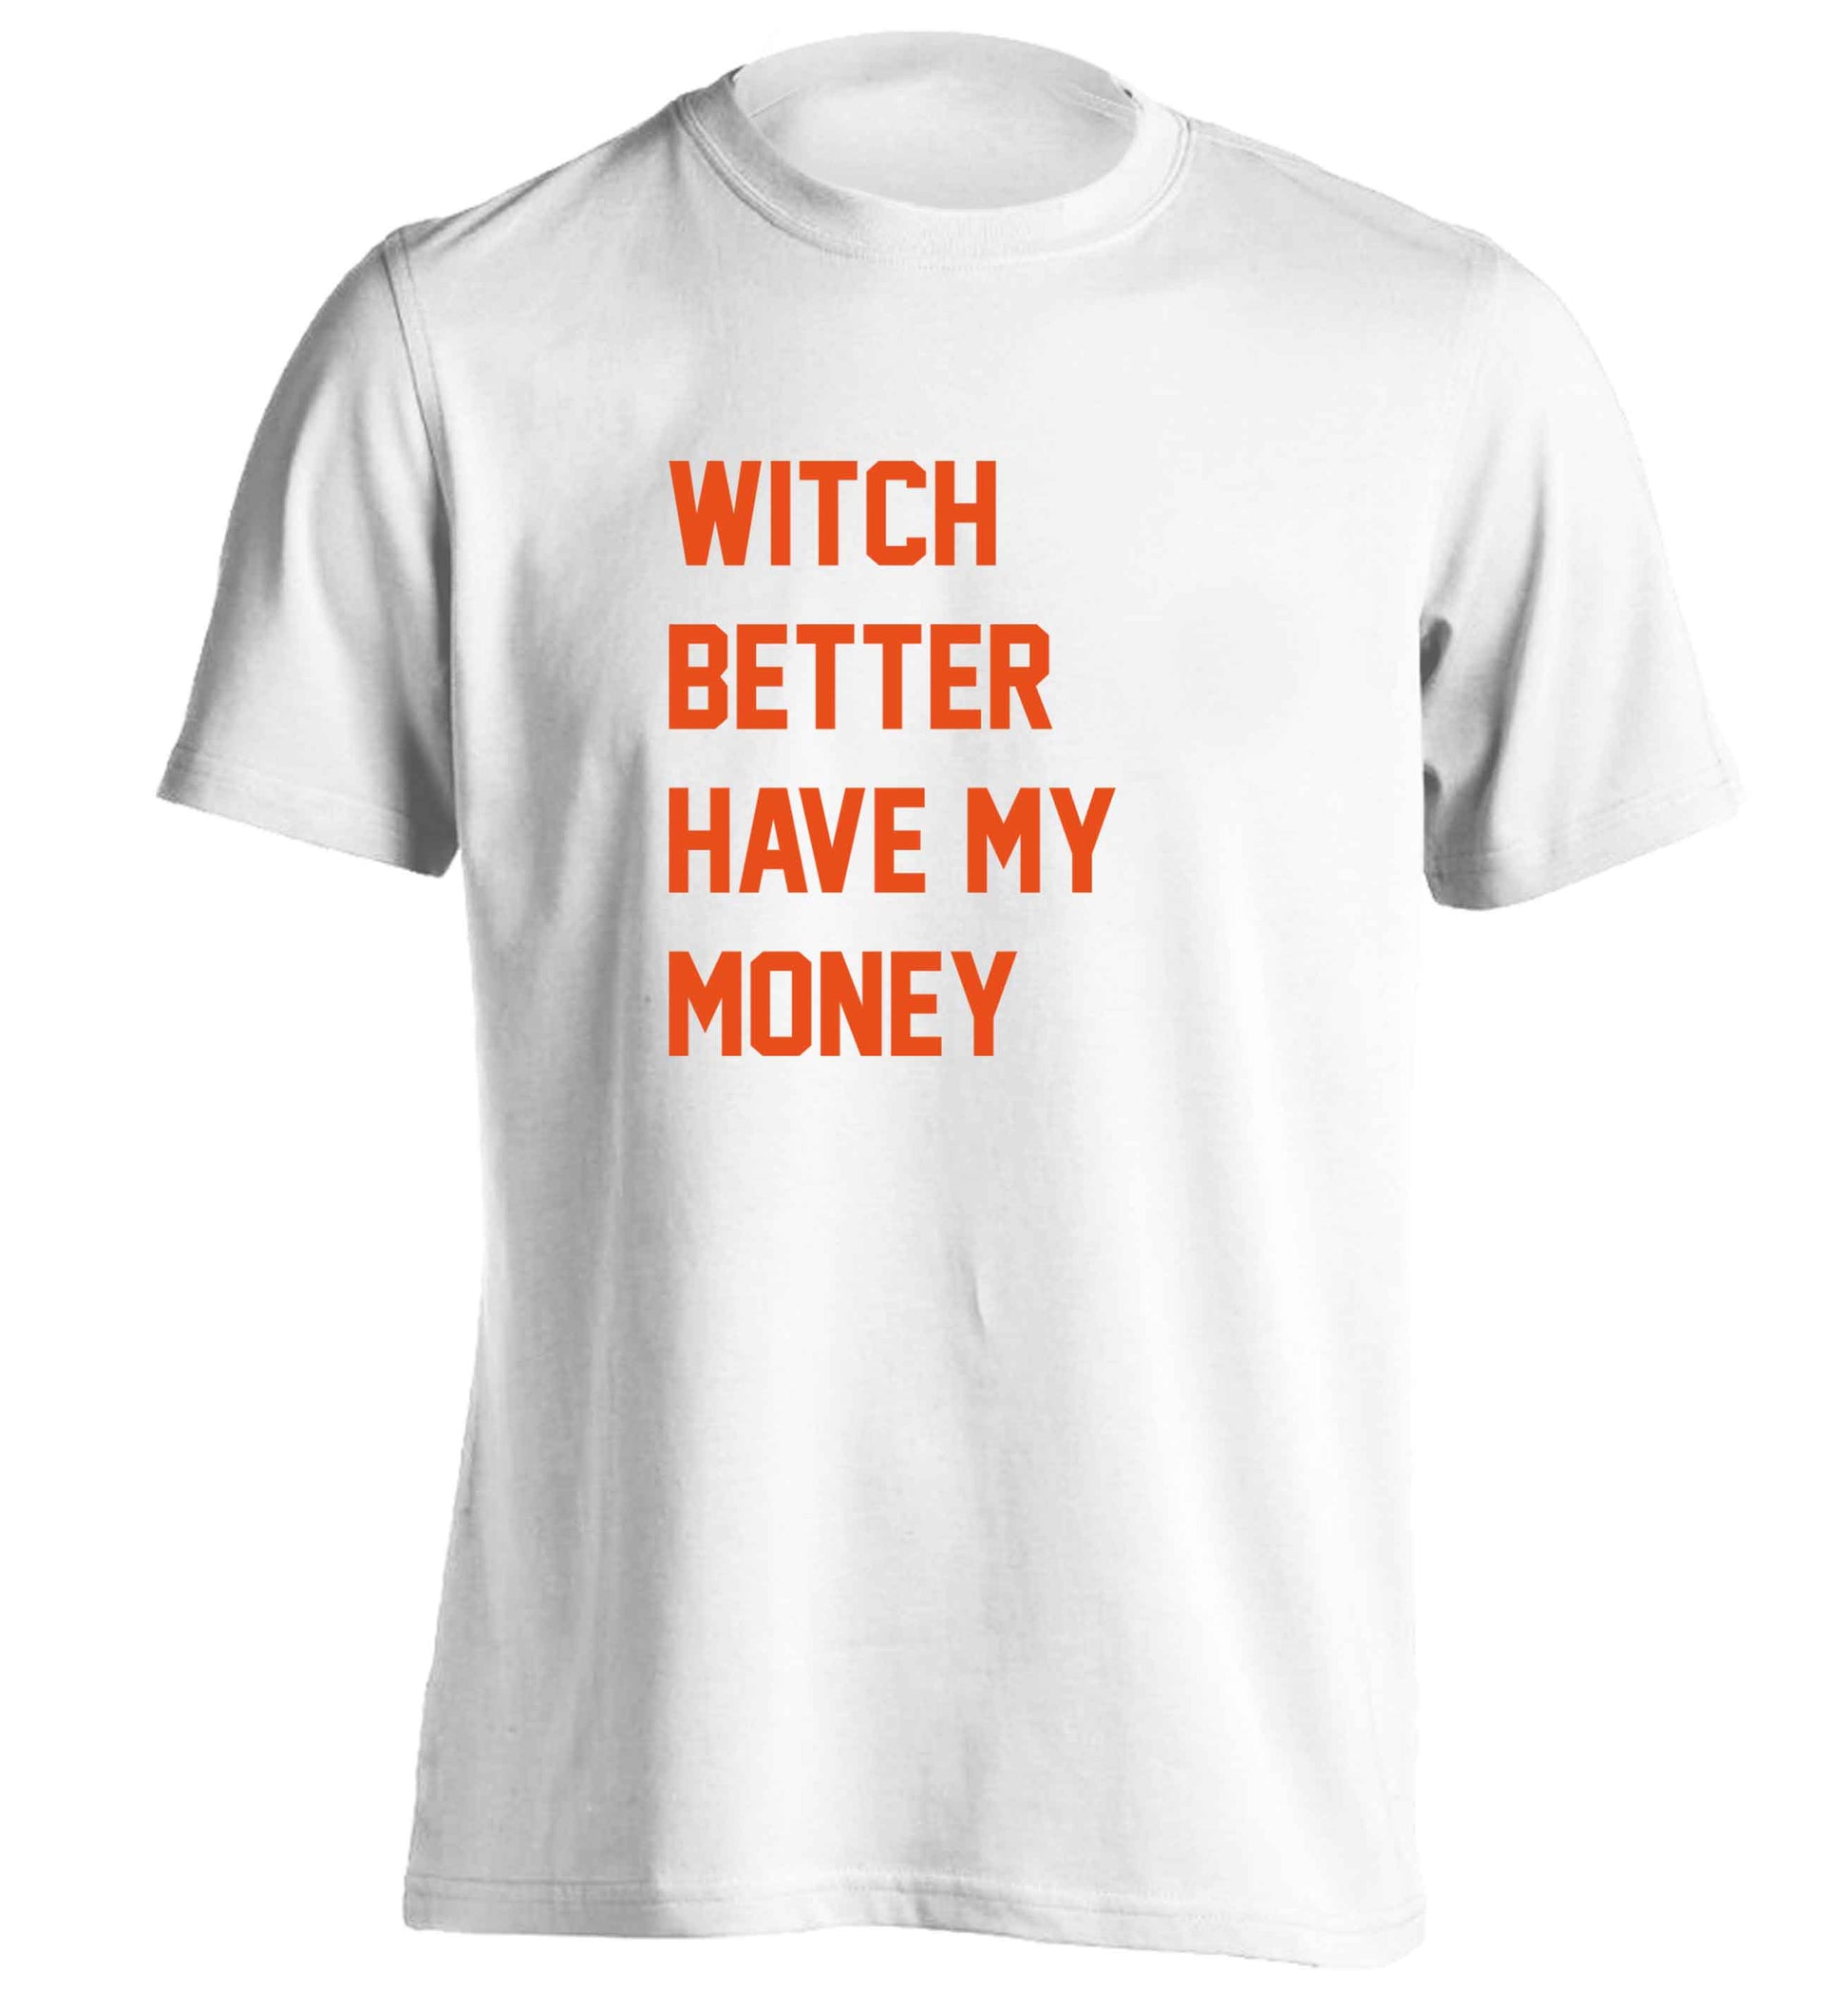 Witch better have my money adults unisex white Tshirt 2XL